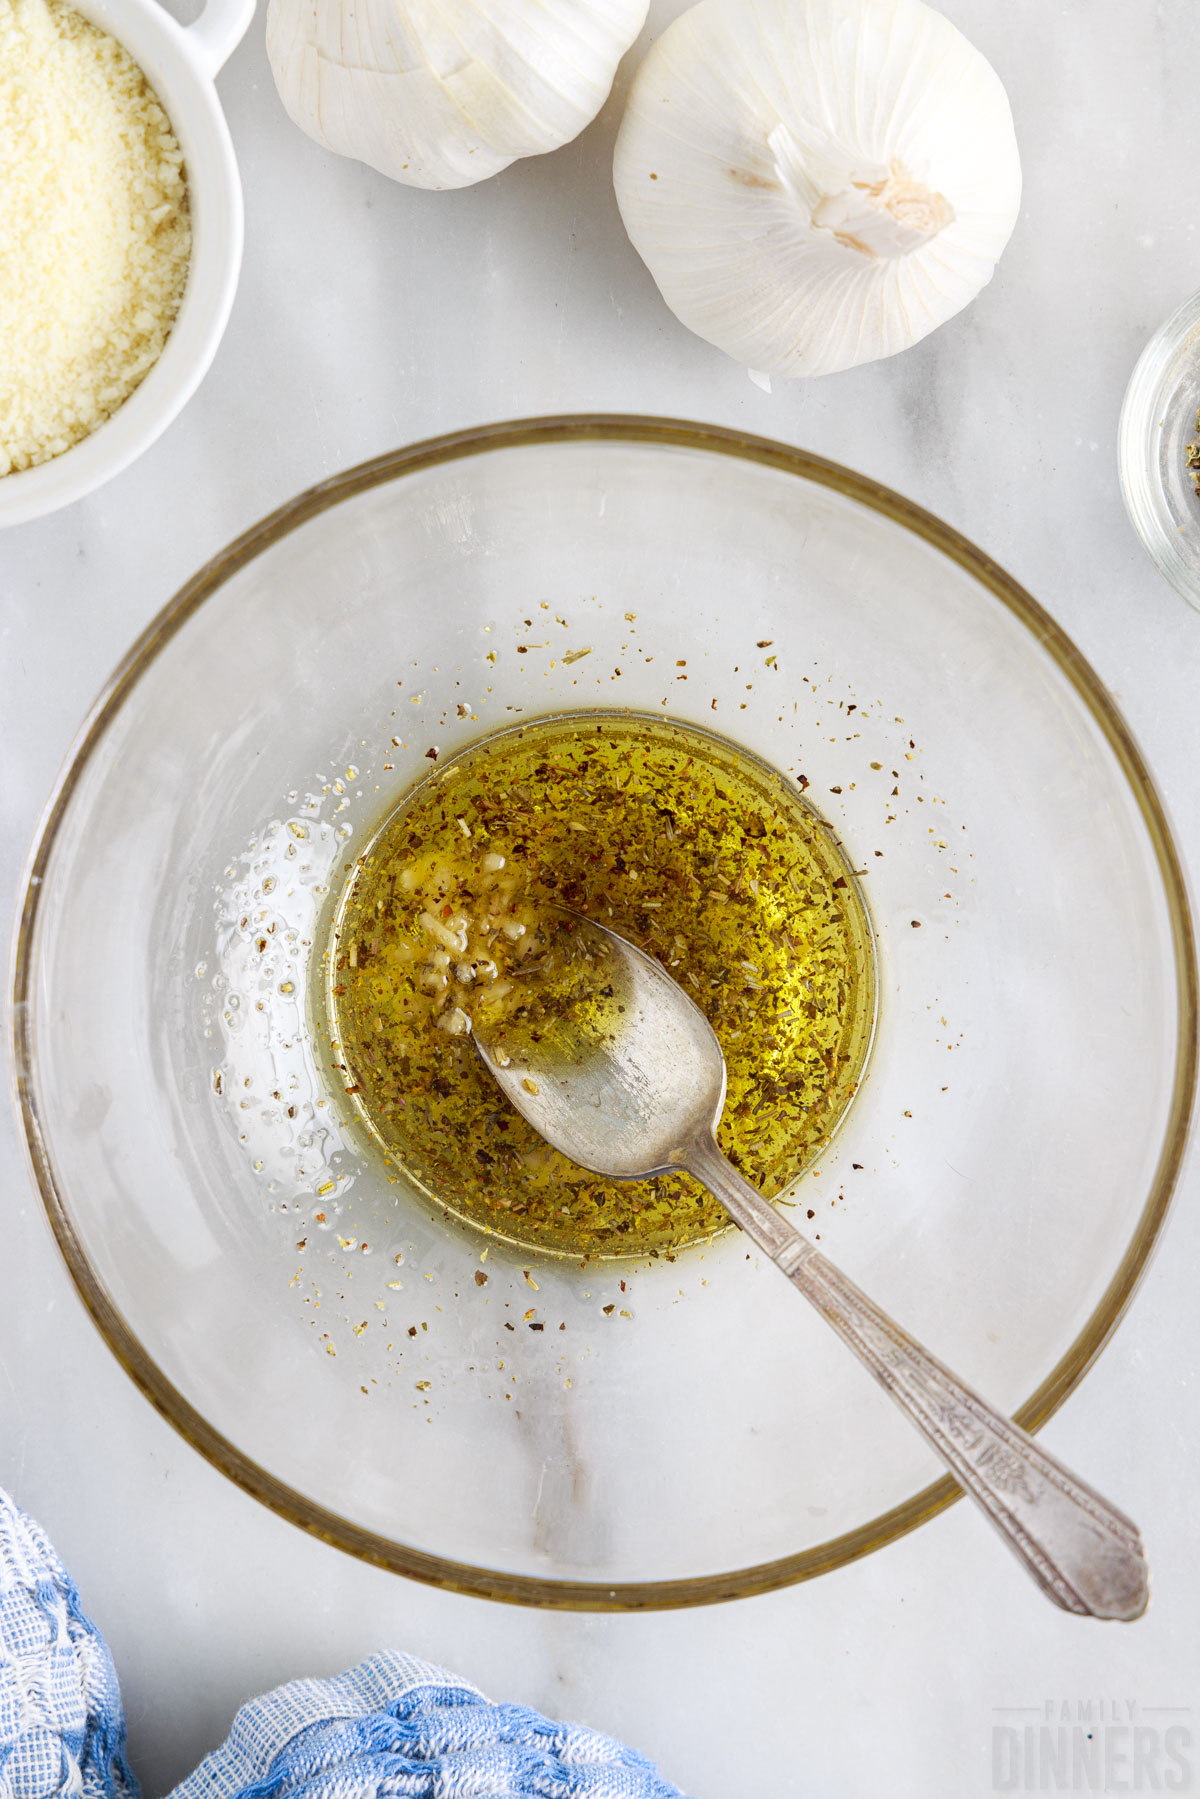 mixing olive oil with spices and garlic